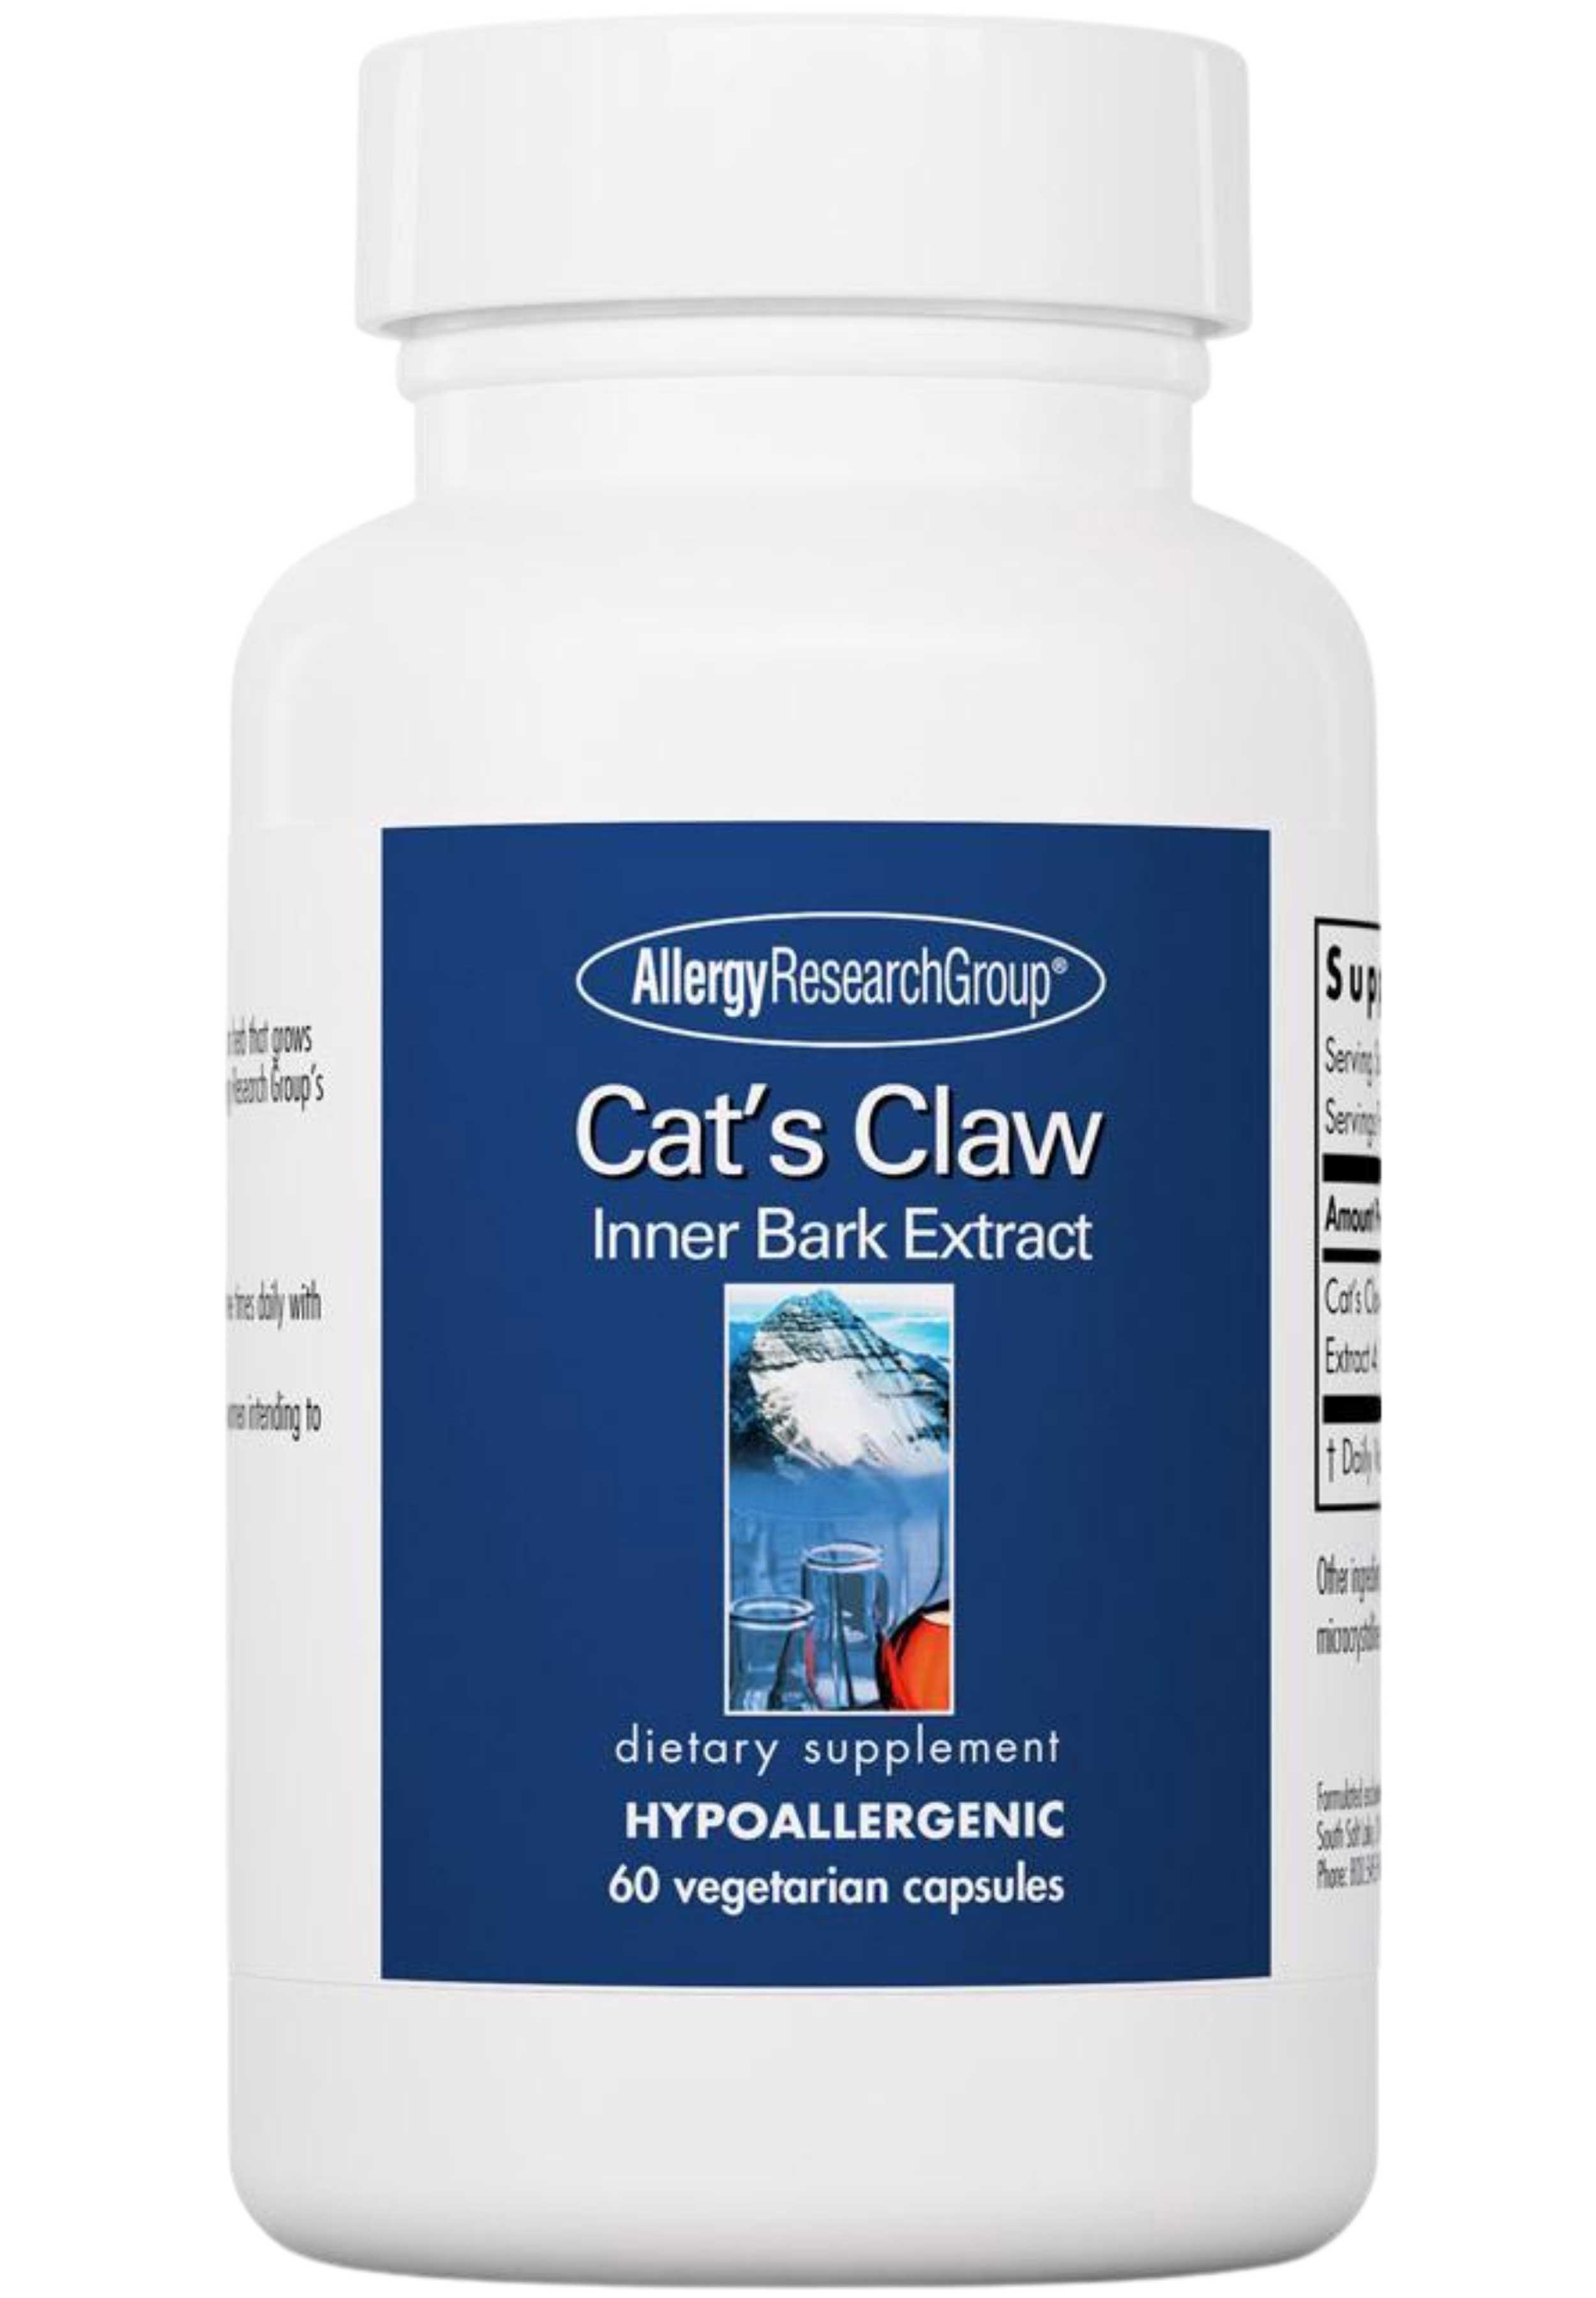 Allergy Research Group Cat's Claw